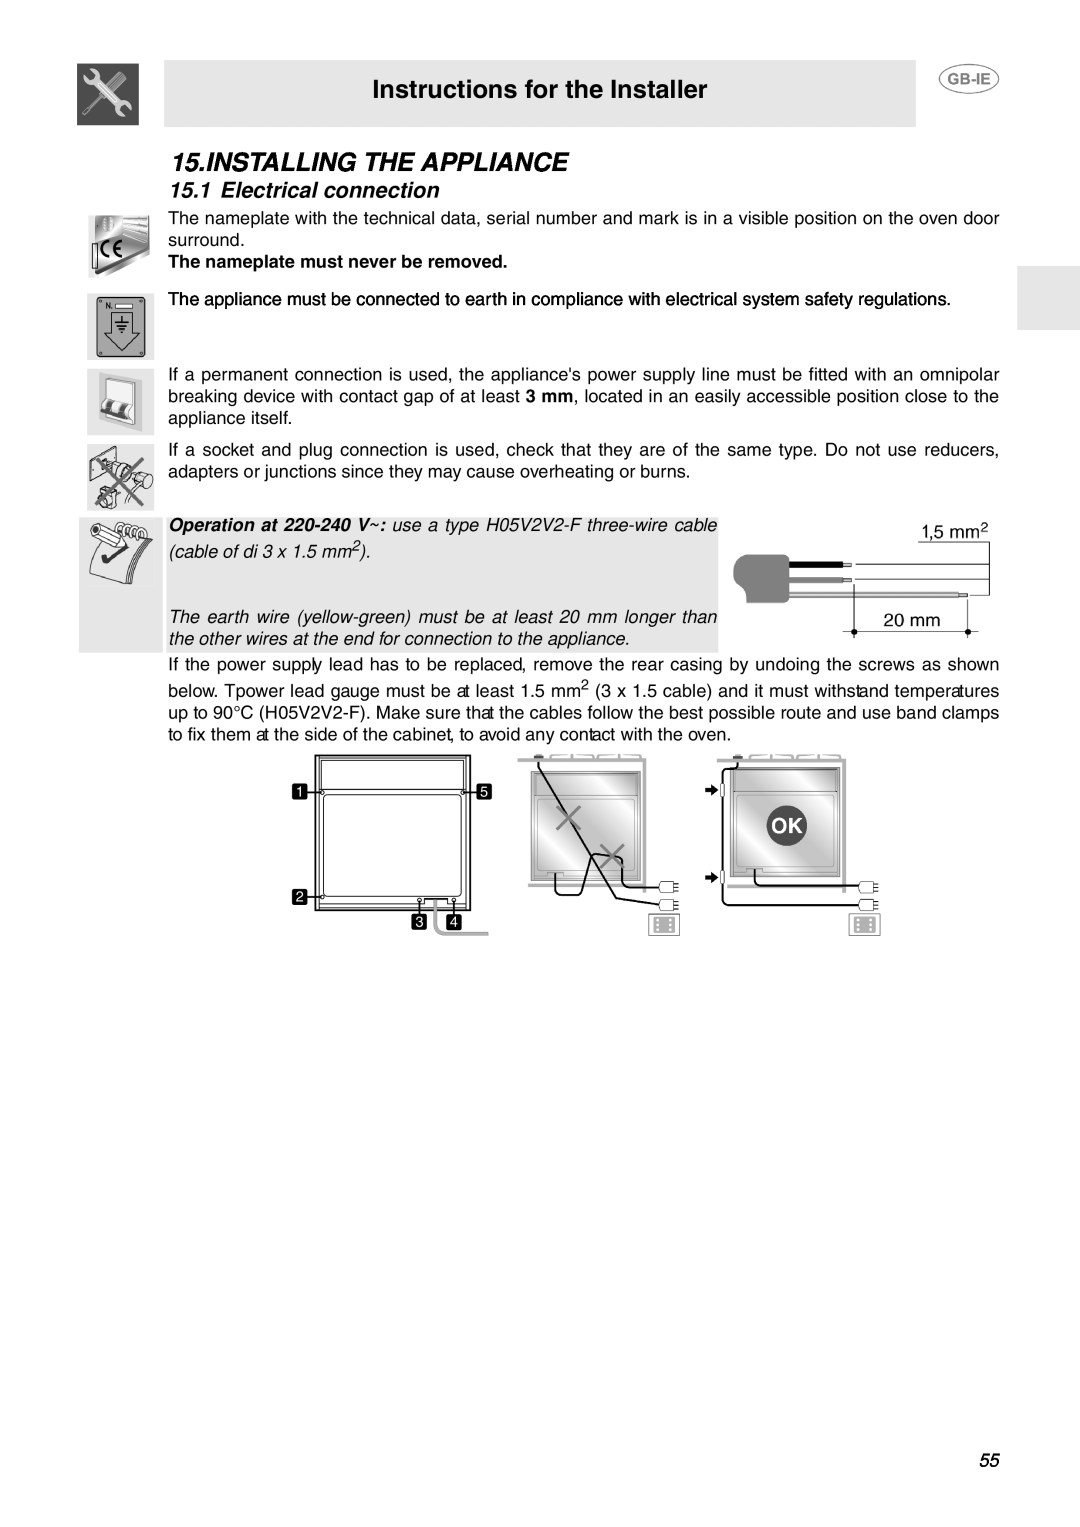 Smeg FP130X, FP130N, FP130B manual Instructions for the Installer, Installing The Appliance, Electrical connection 